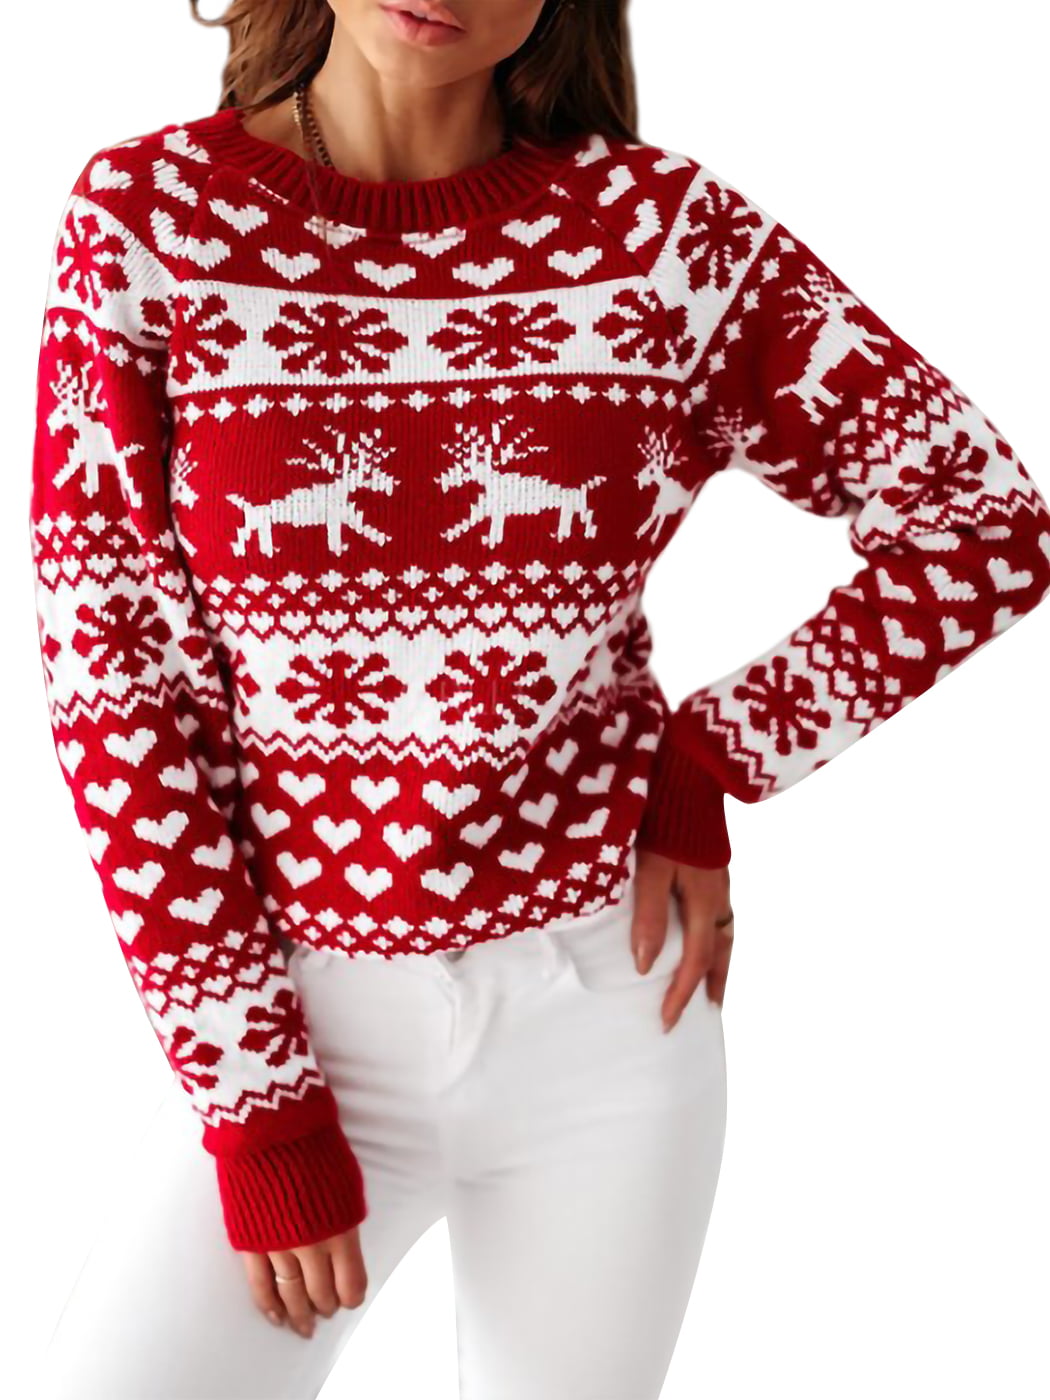 Christmas Long Sleeve Shirts for Women Trendy Vintage Reindeer Graphic Hoodies Thin Cowl Neck Sweater Top with Pockets